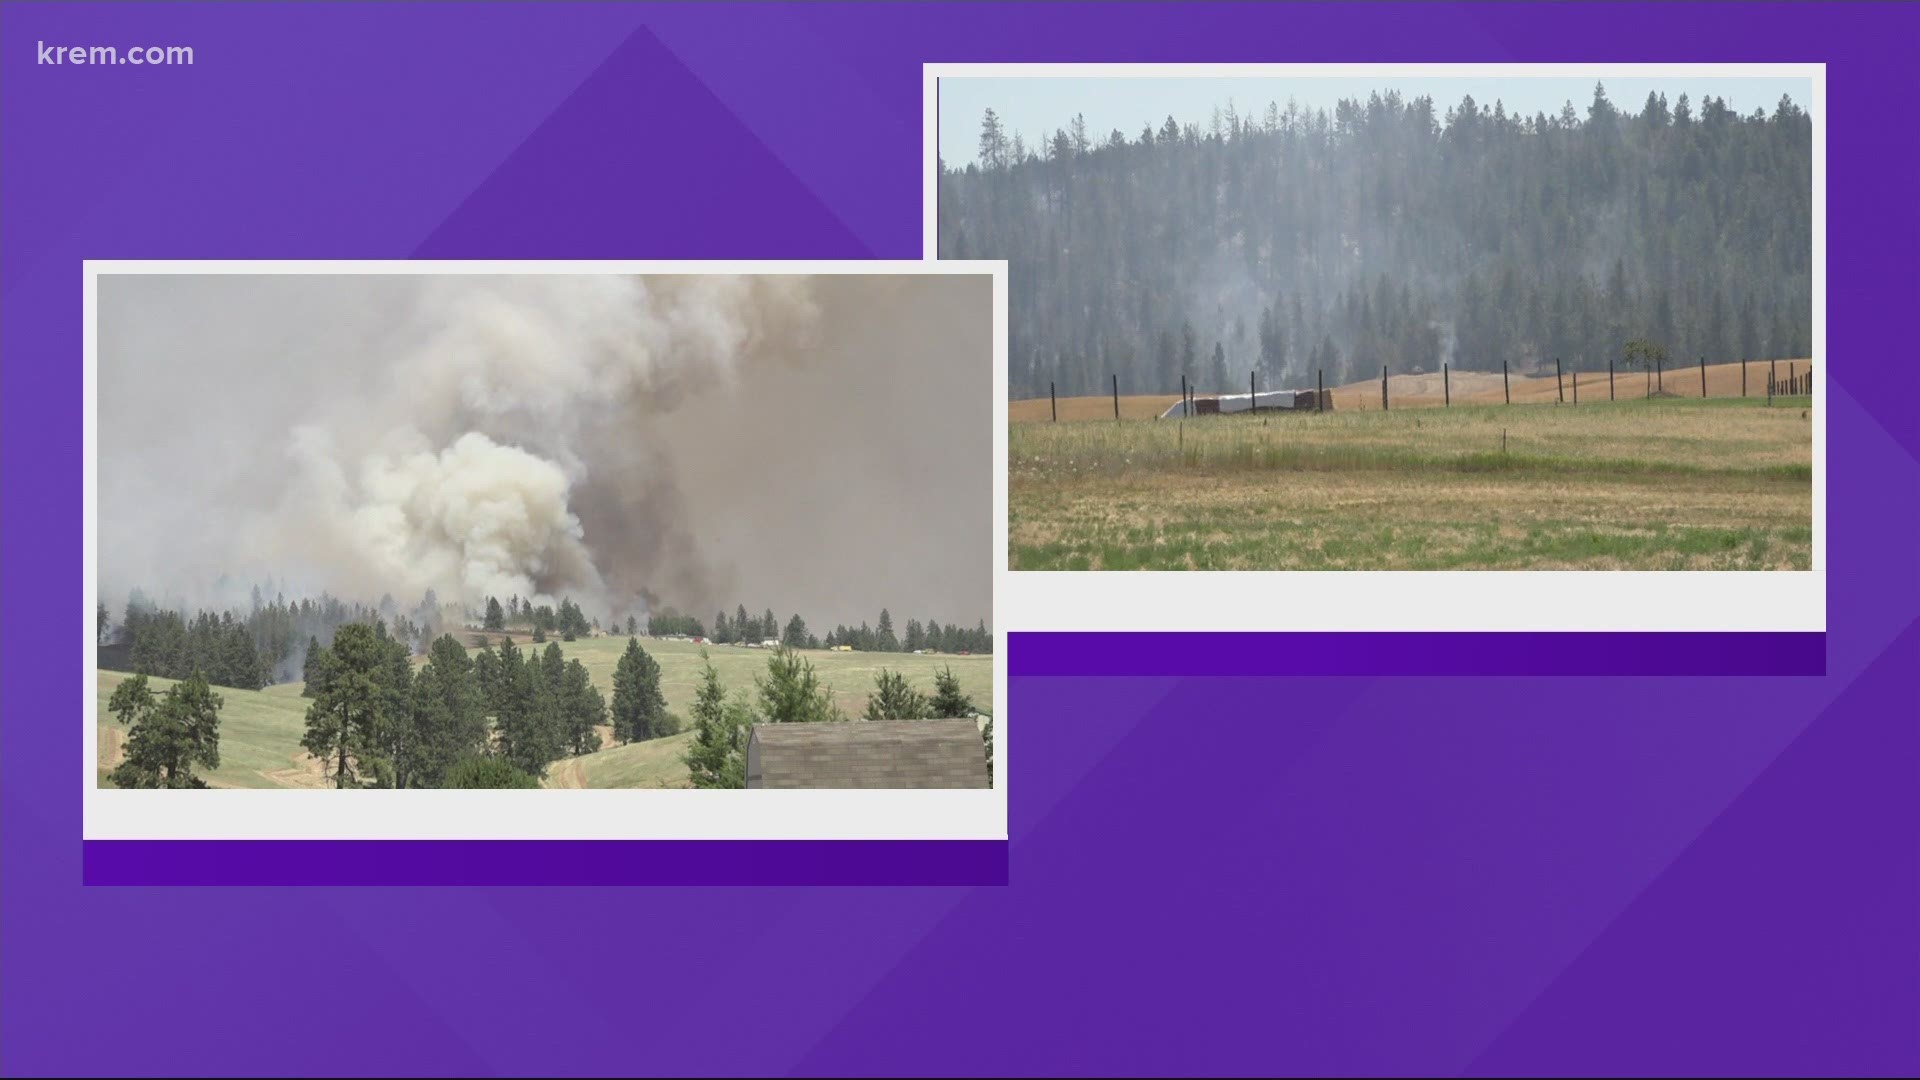 The Andrus Fire near Cheney is now burning 232 acres. Fire officials said they have reached 30% containment on the fire.